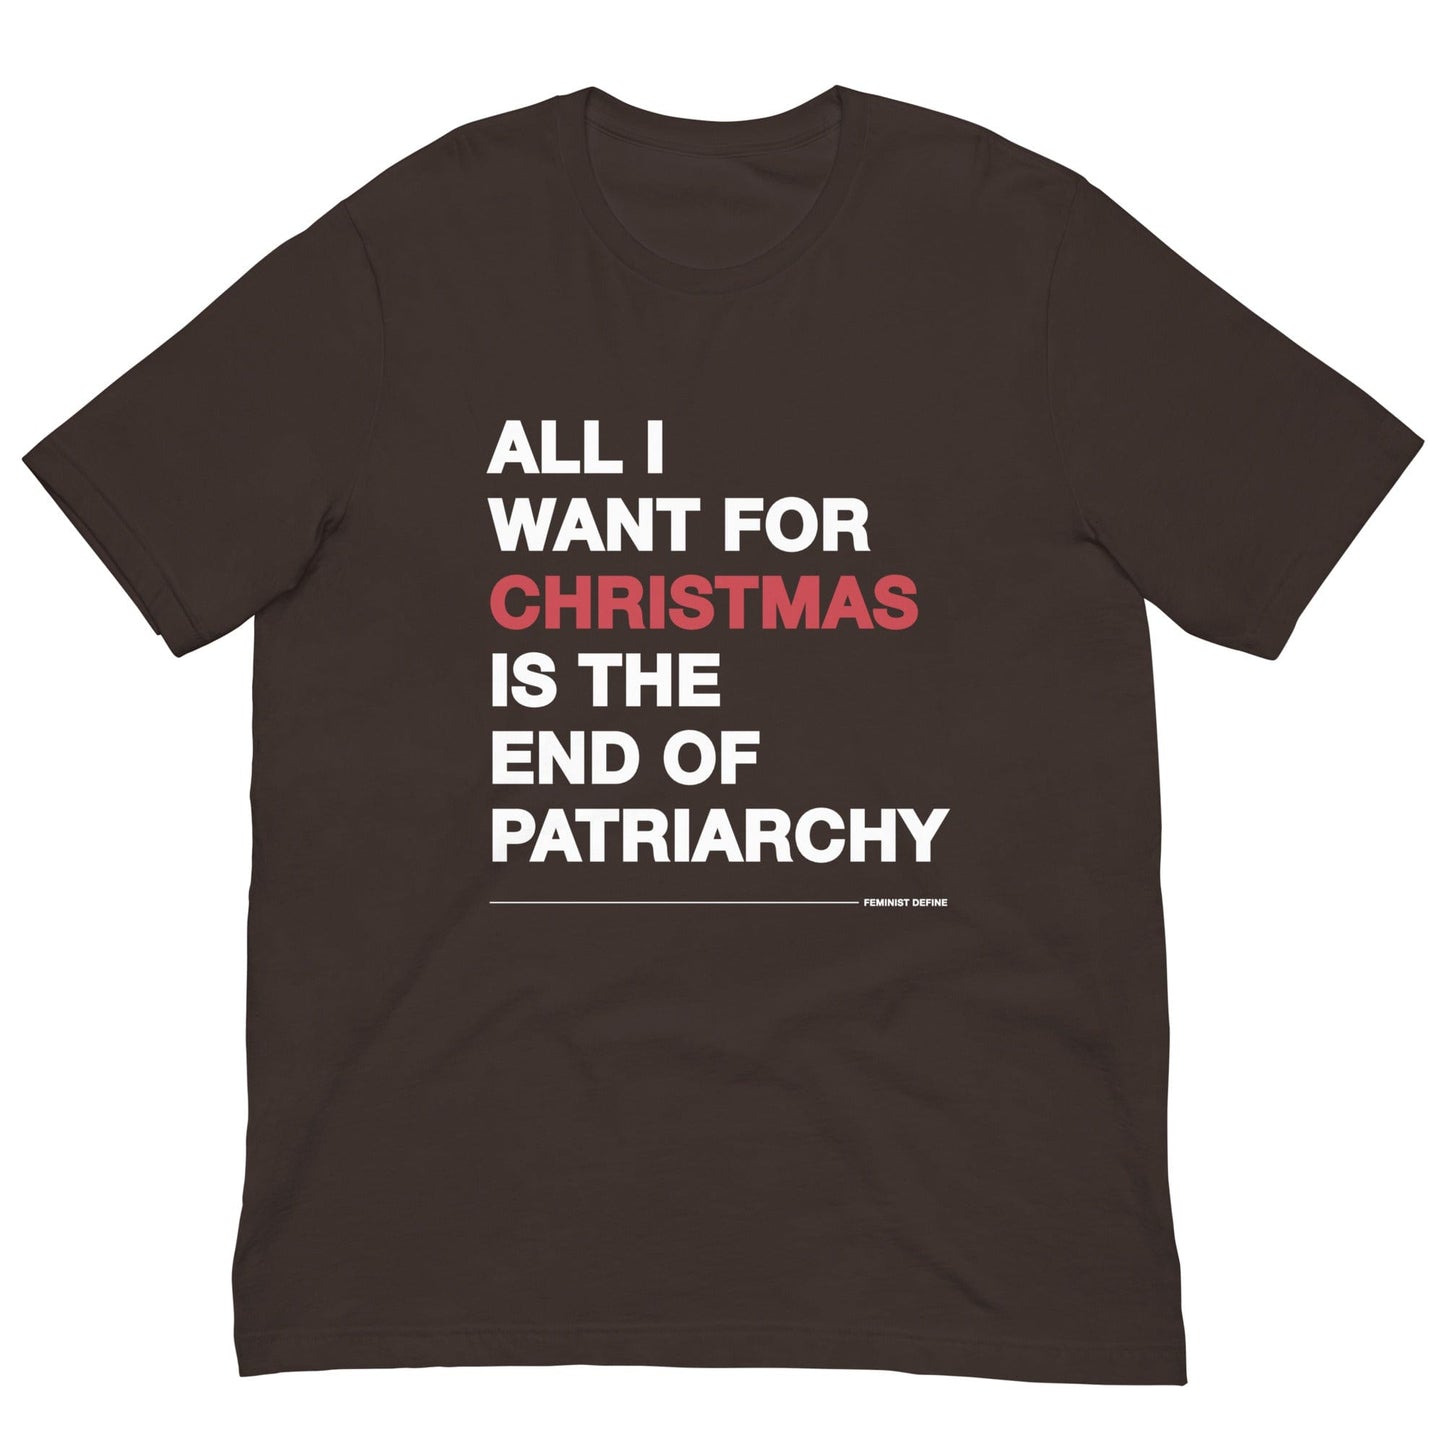 all-i-want-for-christmas-feminist-t-shirt-brown-by-feminist-define